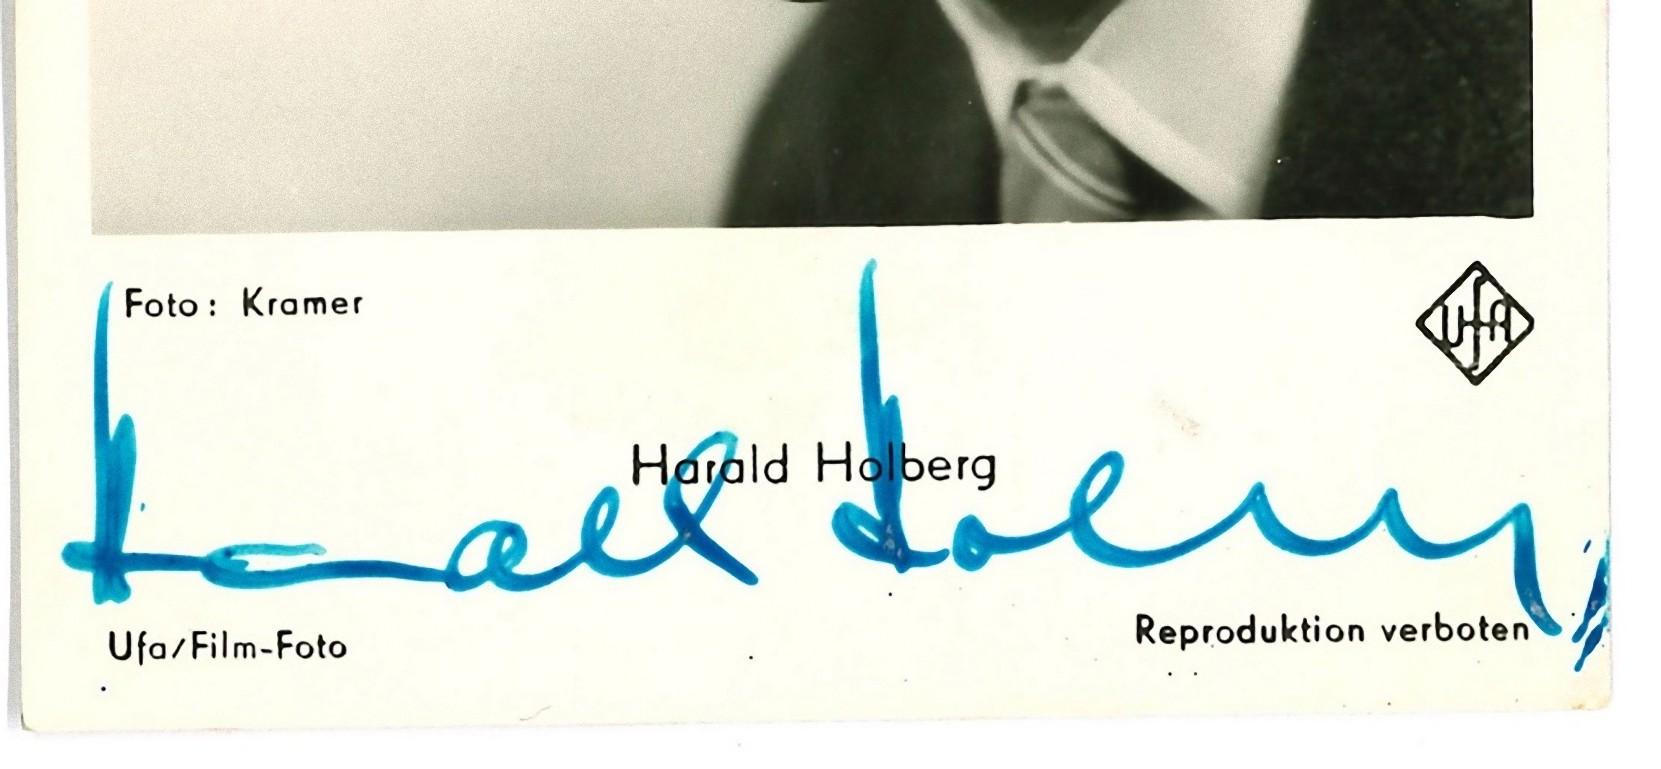 Autographed Portrait of Harald Holberg - Vintage b/w Postcard - 1960s - Photograph by Unknown